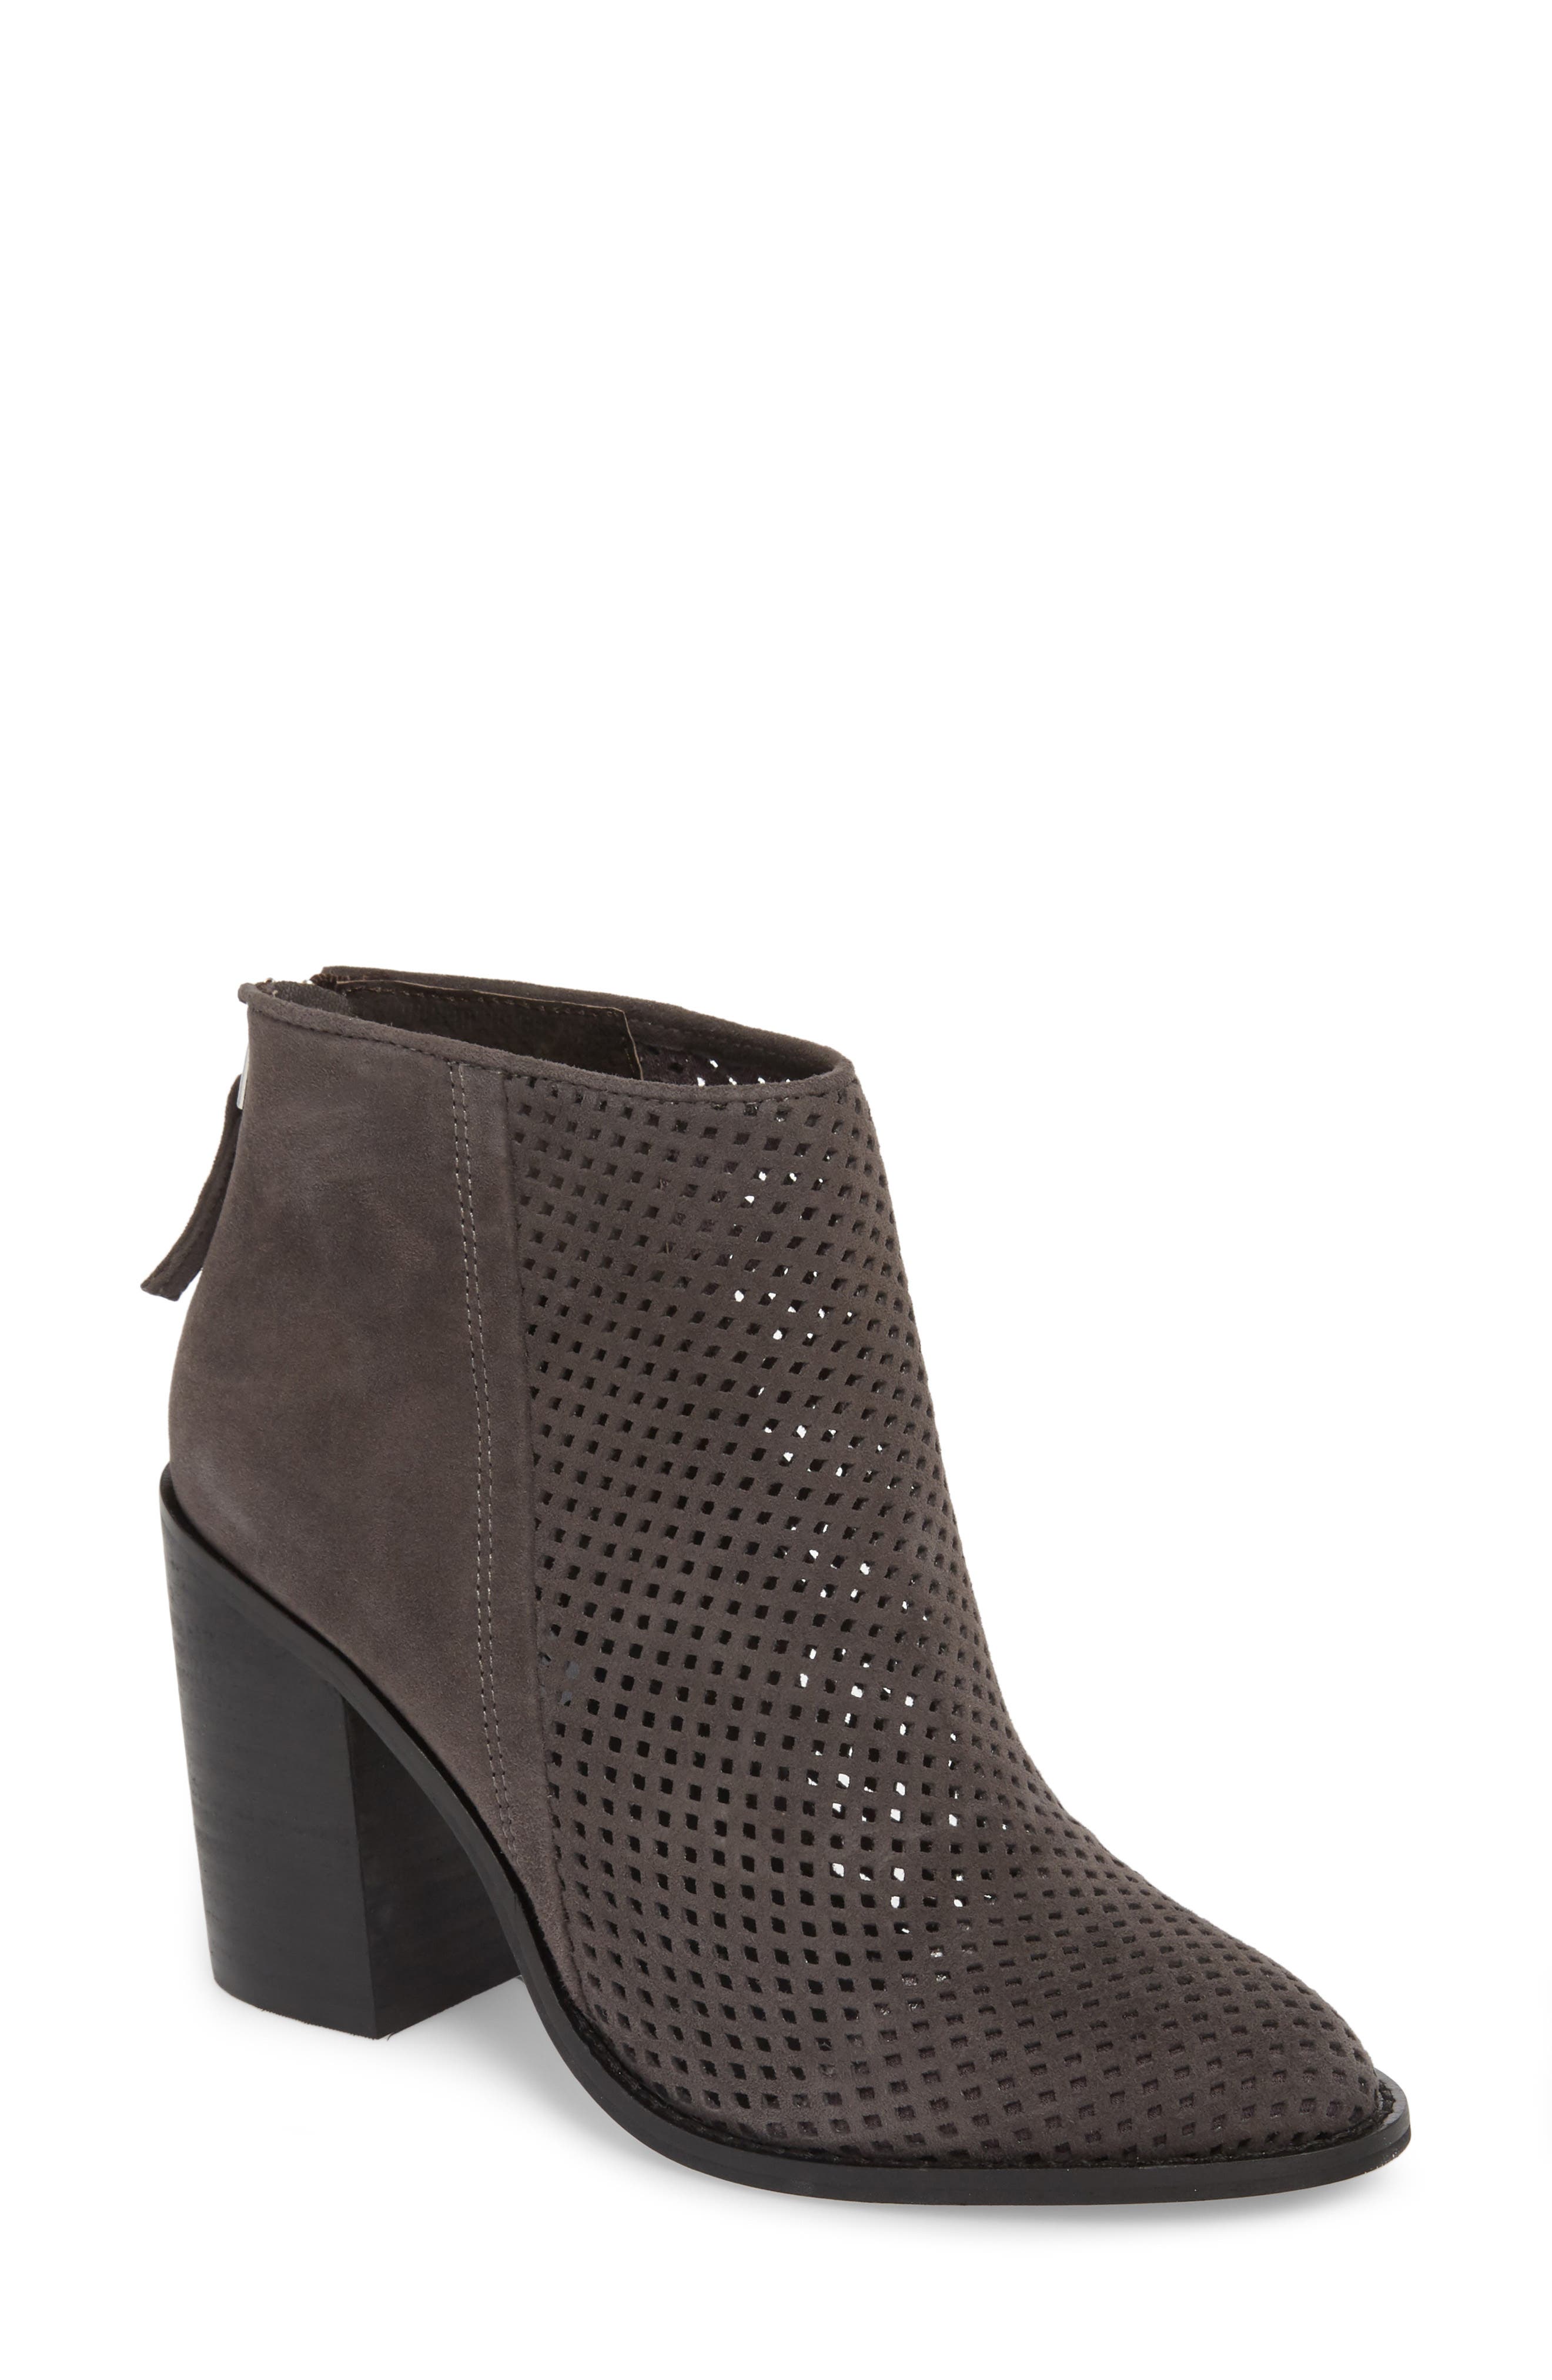 steve madden perforated booties